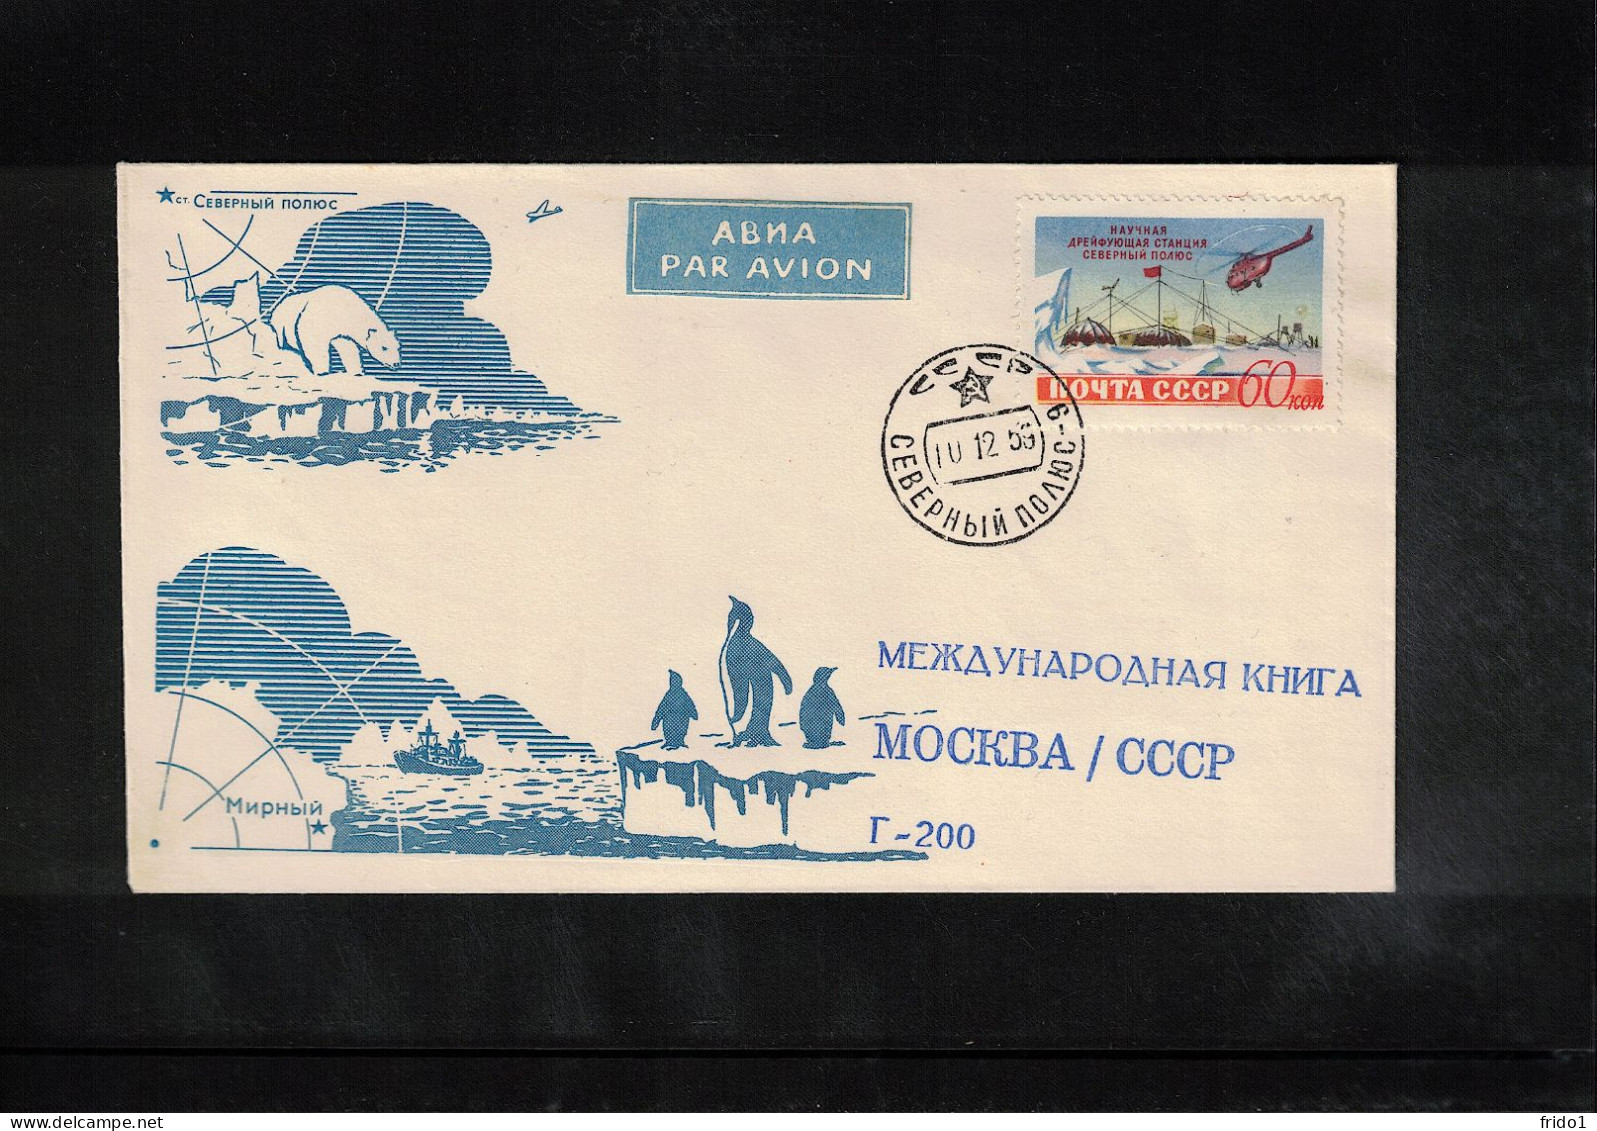 Russia USSR 1959 North Pole Station Sewernyi Poljus Interesting Cover - Wetenschappelijke Stations & Arctic Drifting Stations